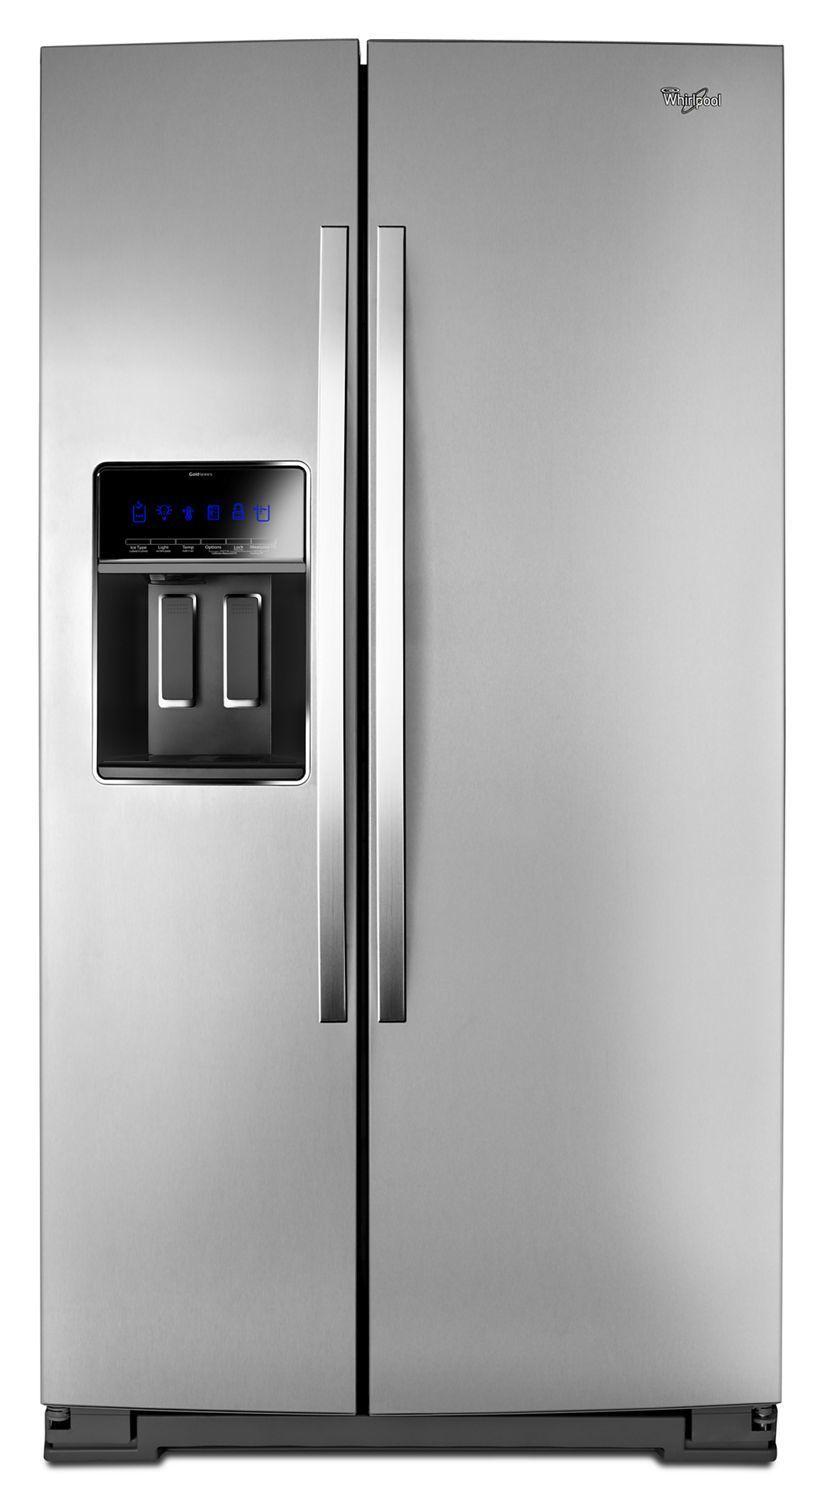 Whirlpool 36-inch Wide Side-by-Side Counter Depth Refrigerator with StoreRight Dual Cooling System - 23 cu. ft. Monochromatic Stainless Steel